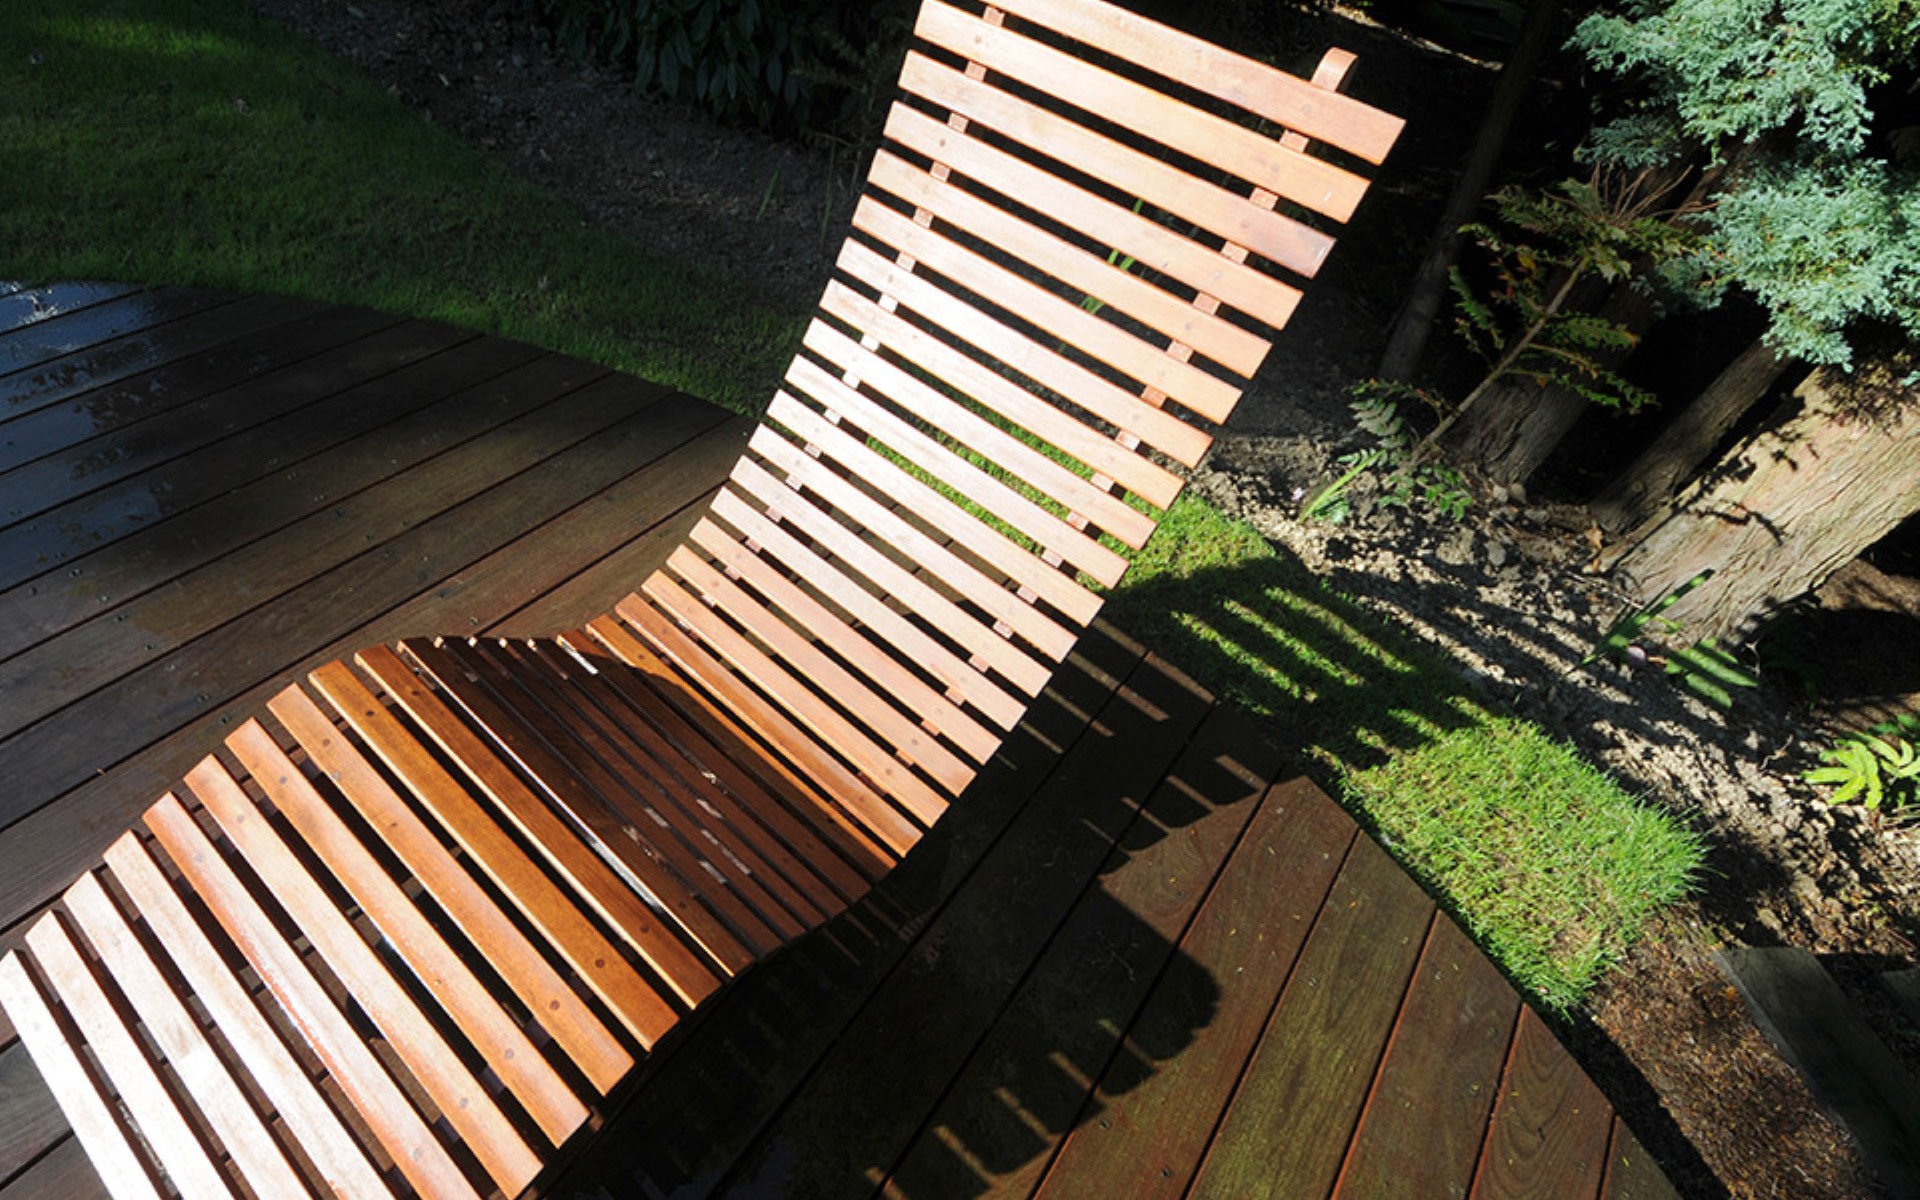 Surrey Haslemere chair and decking design